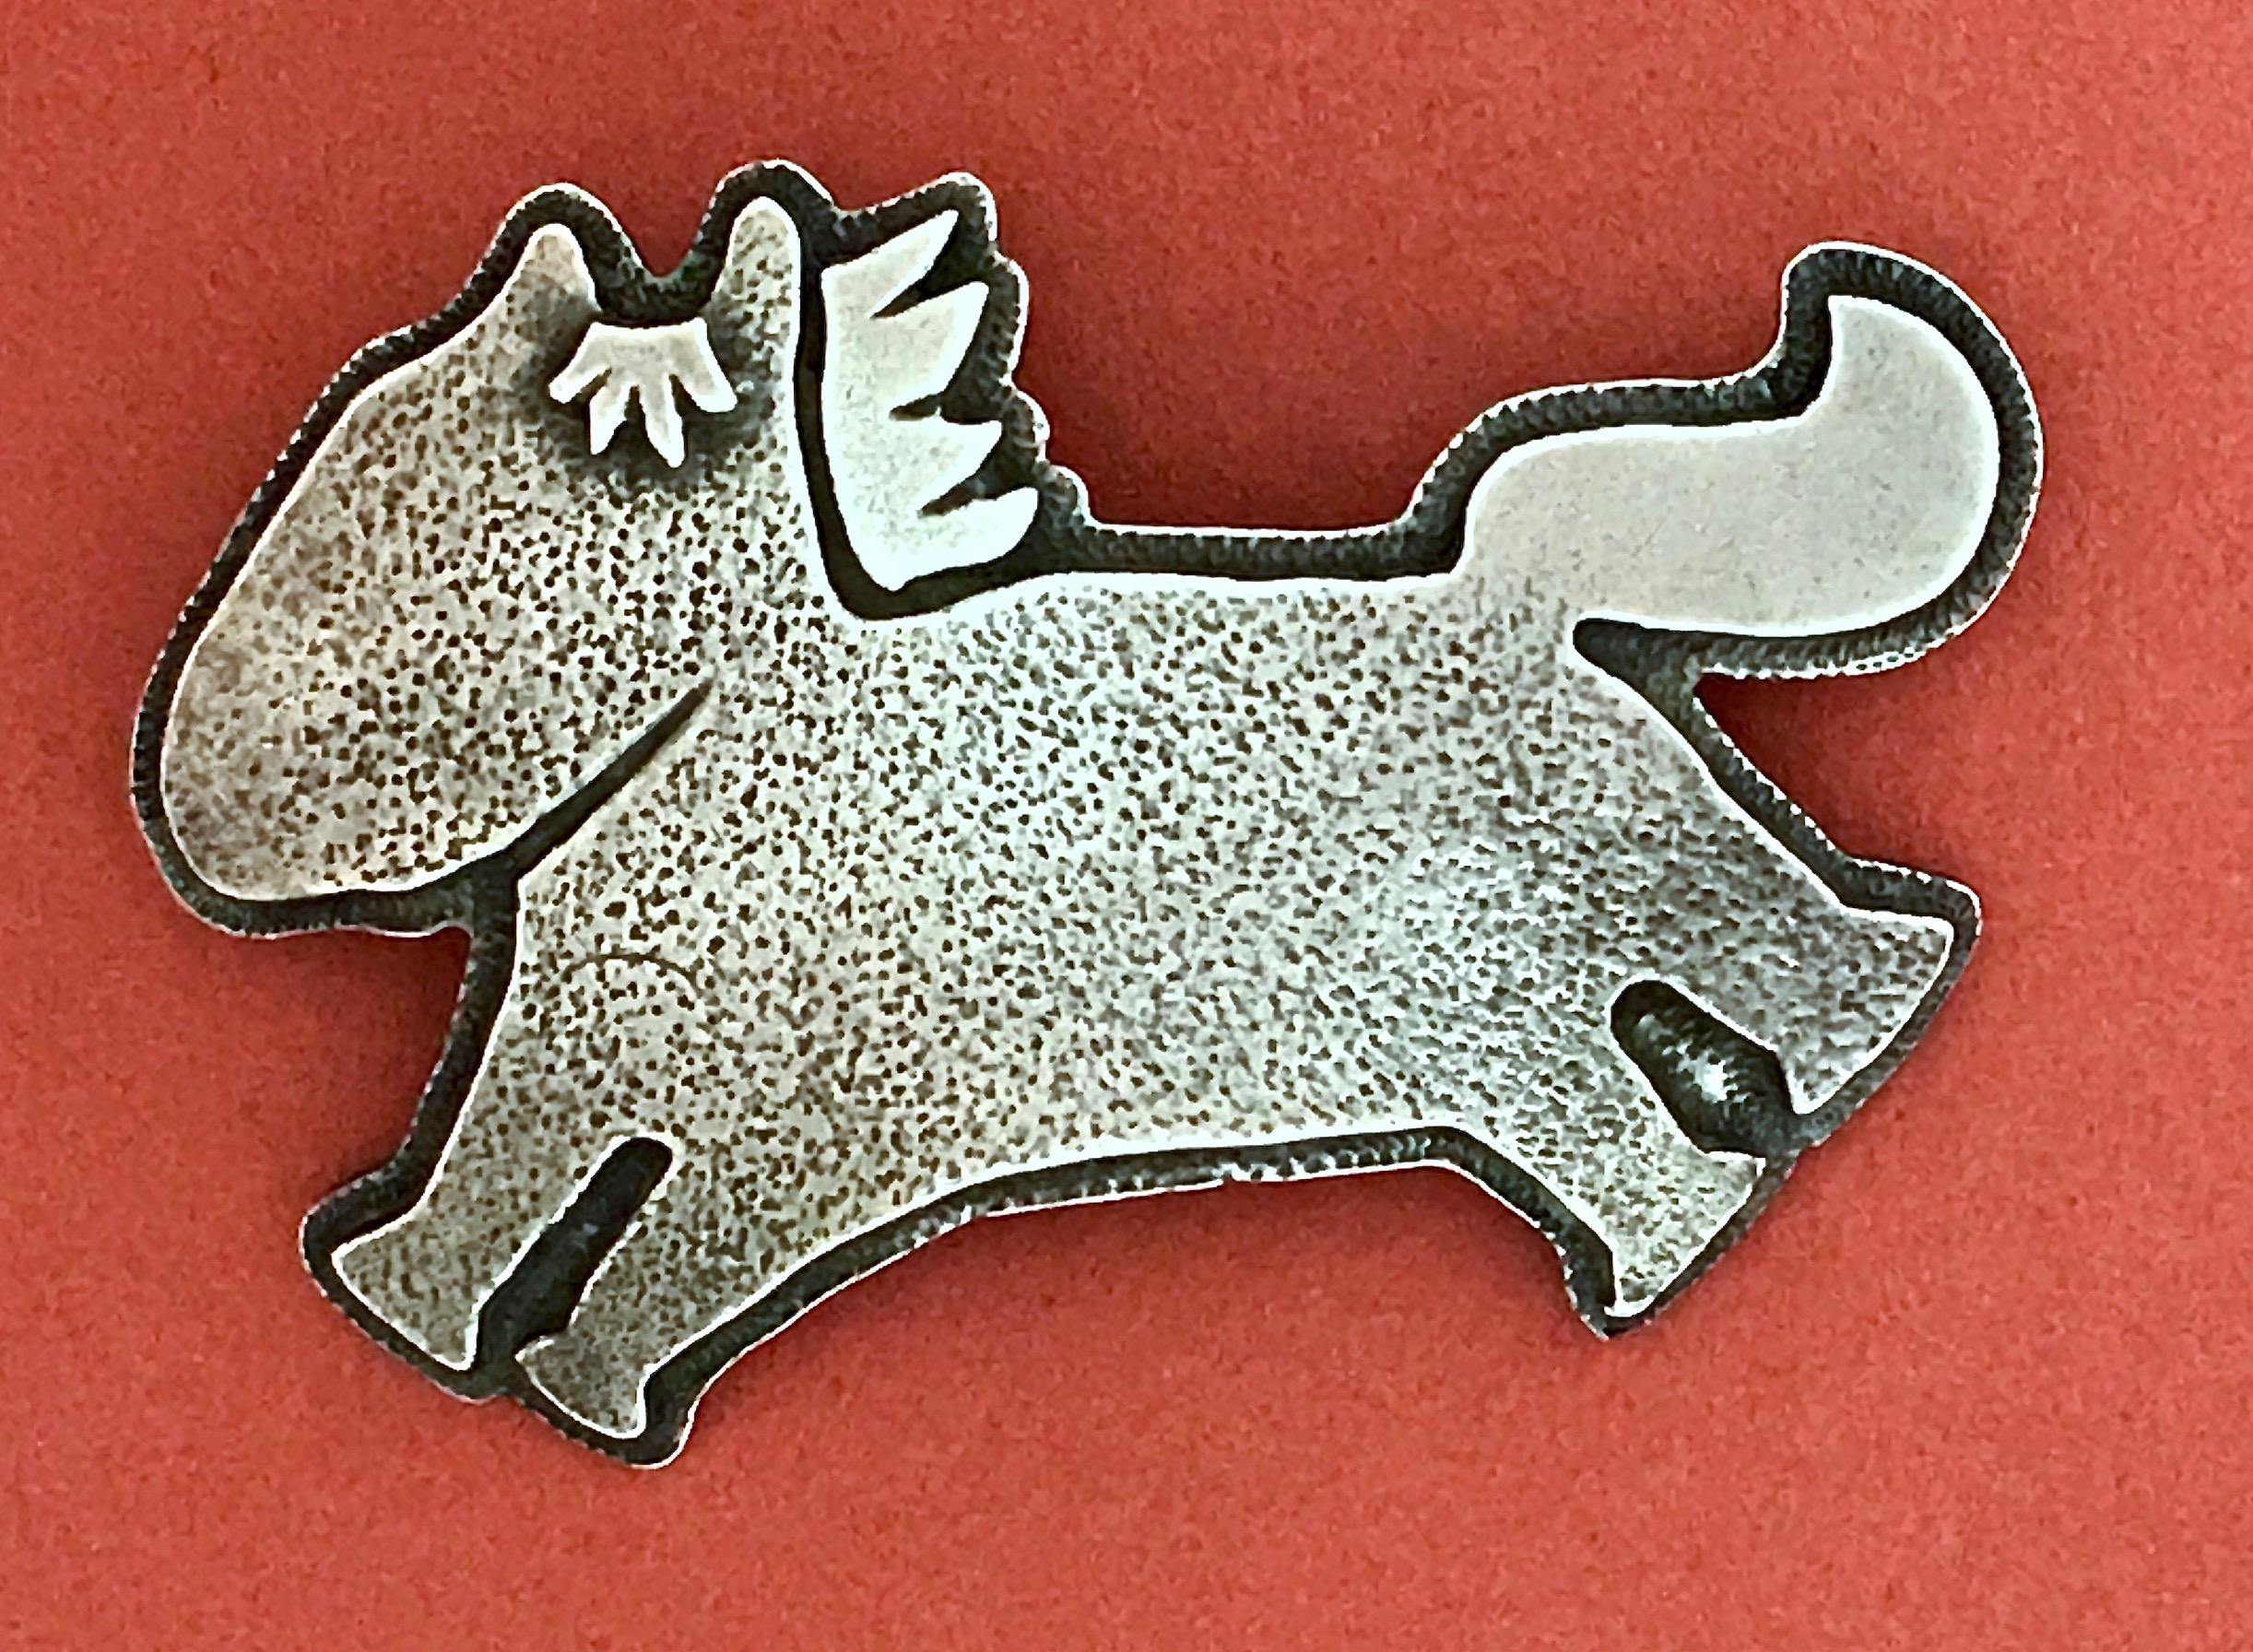 Beverly Hills Yazzie, sterling silver pendant Melanie Yazzie Horse Navajo
Also available with a pin back. Contact us for information.

Wearable art jewelry designs by internationally known printmaker, sculptor, and painter. 
Cast and hand-finished